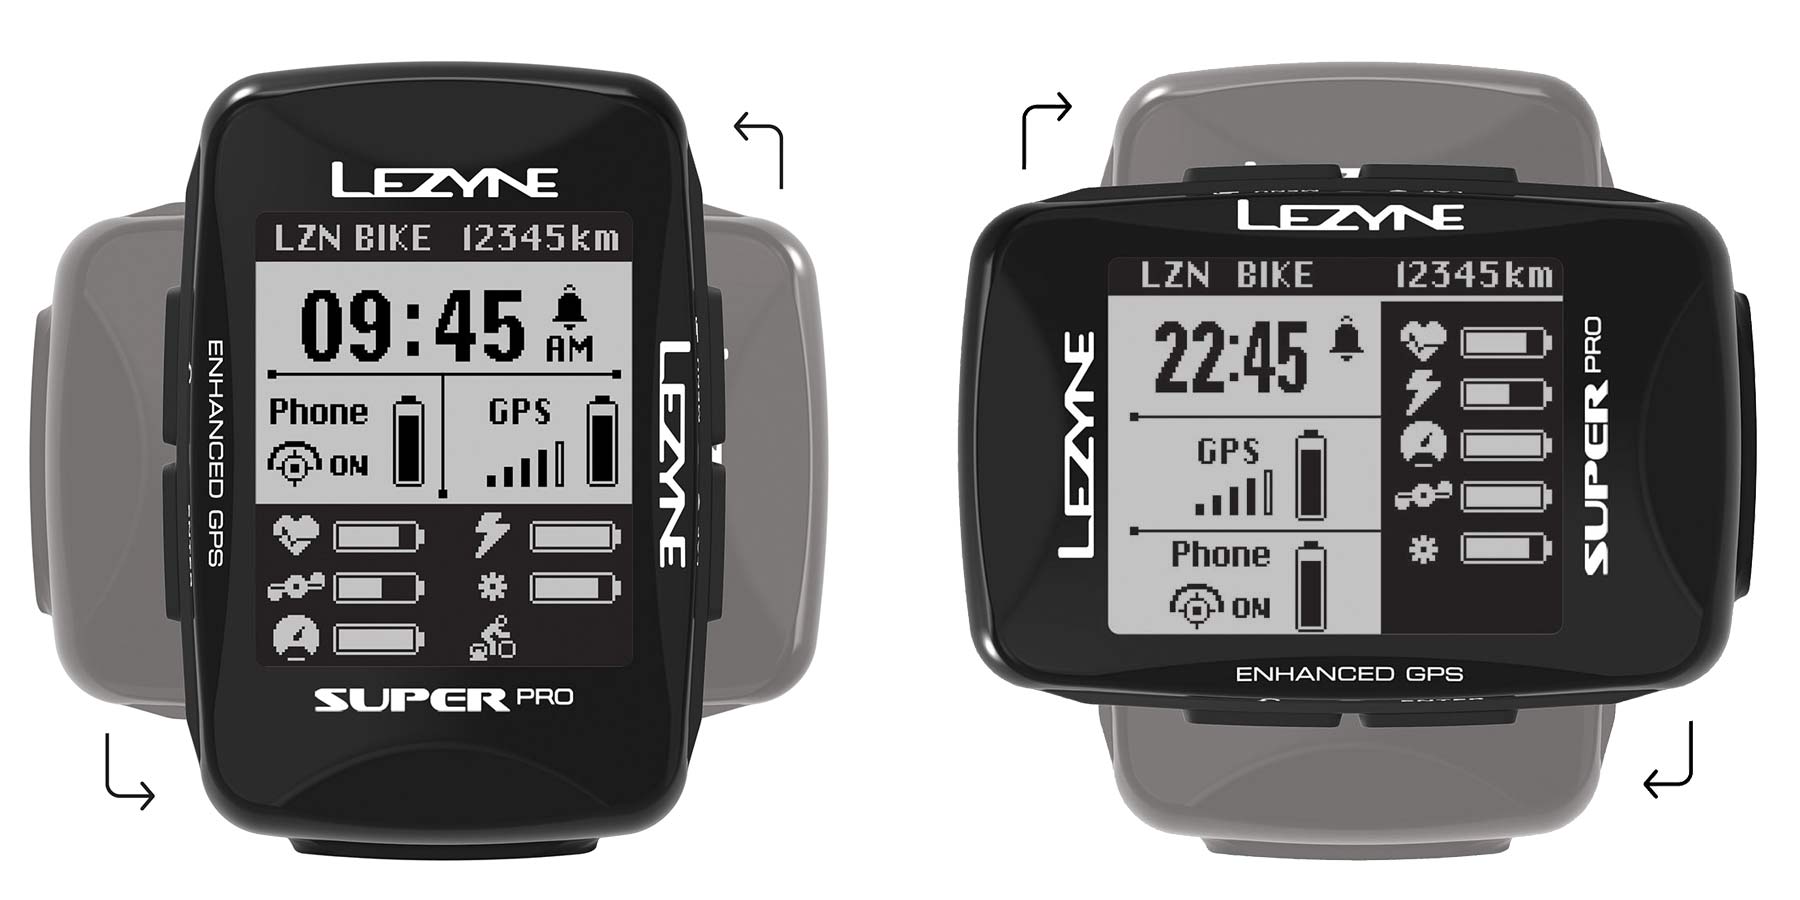 Lezyne Super Pro GPS, updated full featured map-enabled cycling computer